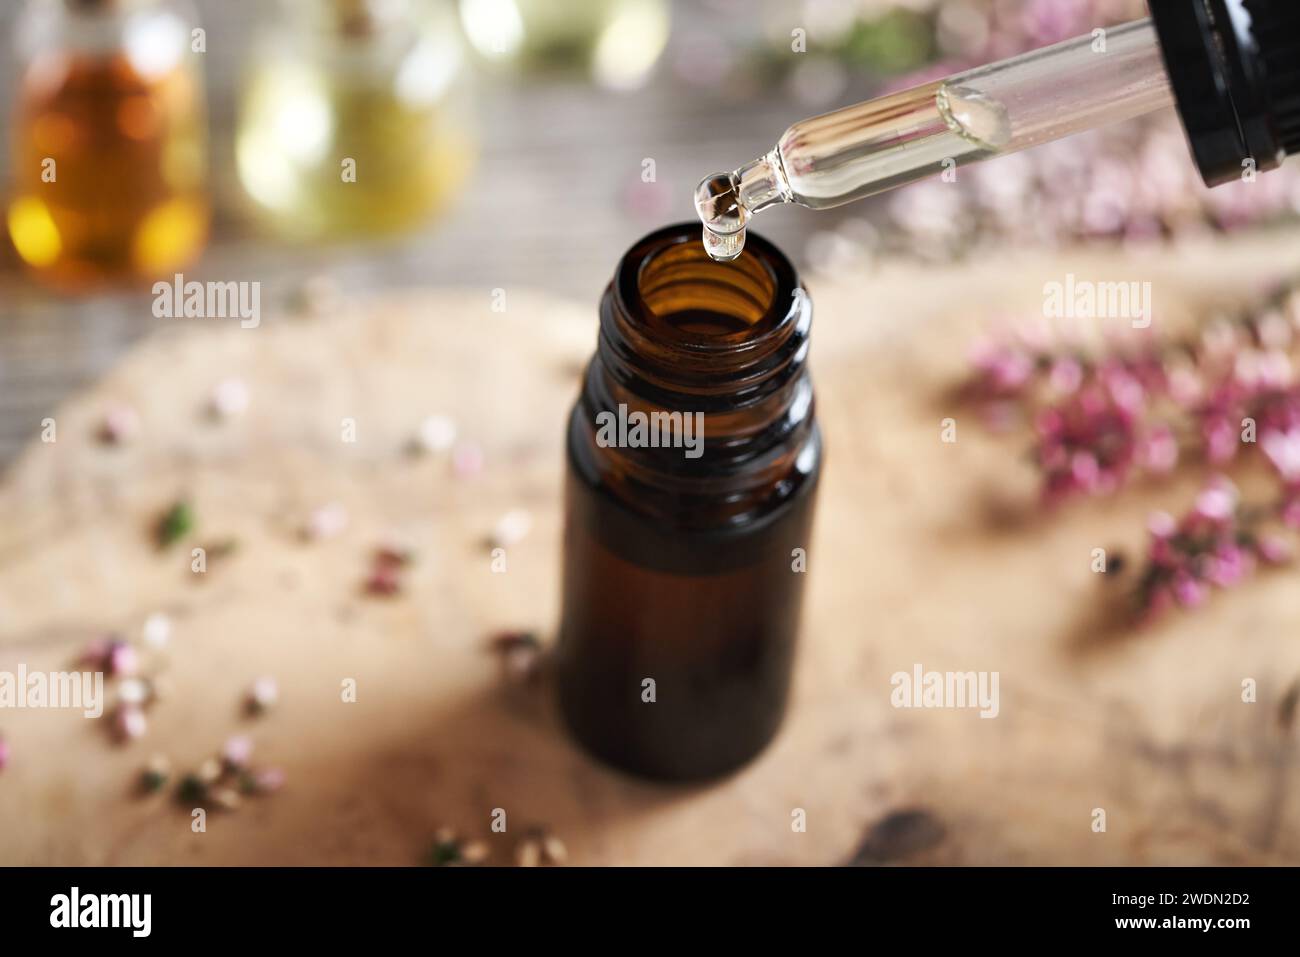 A drop of aromatherapy assential oil falling into a brown glass bottle on a table Stock Photo